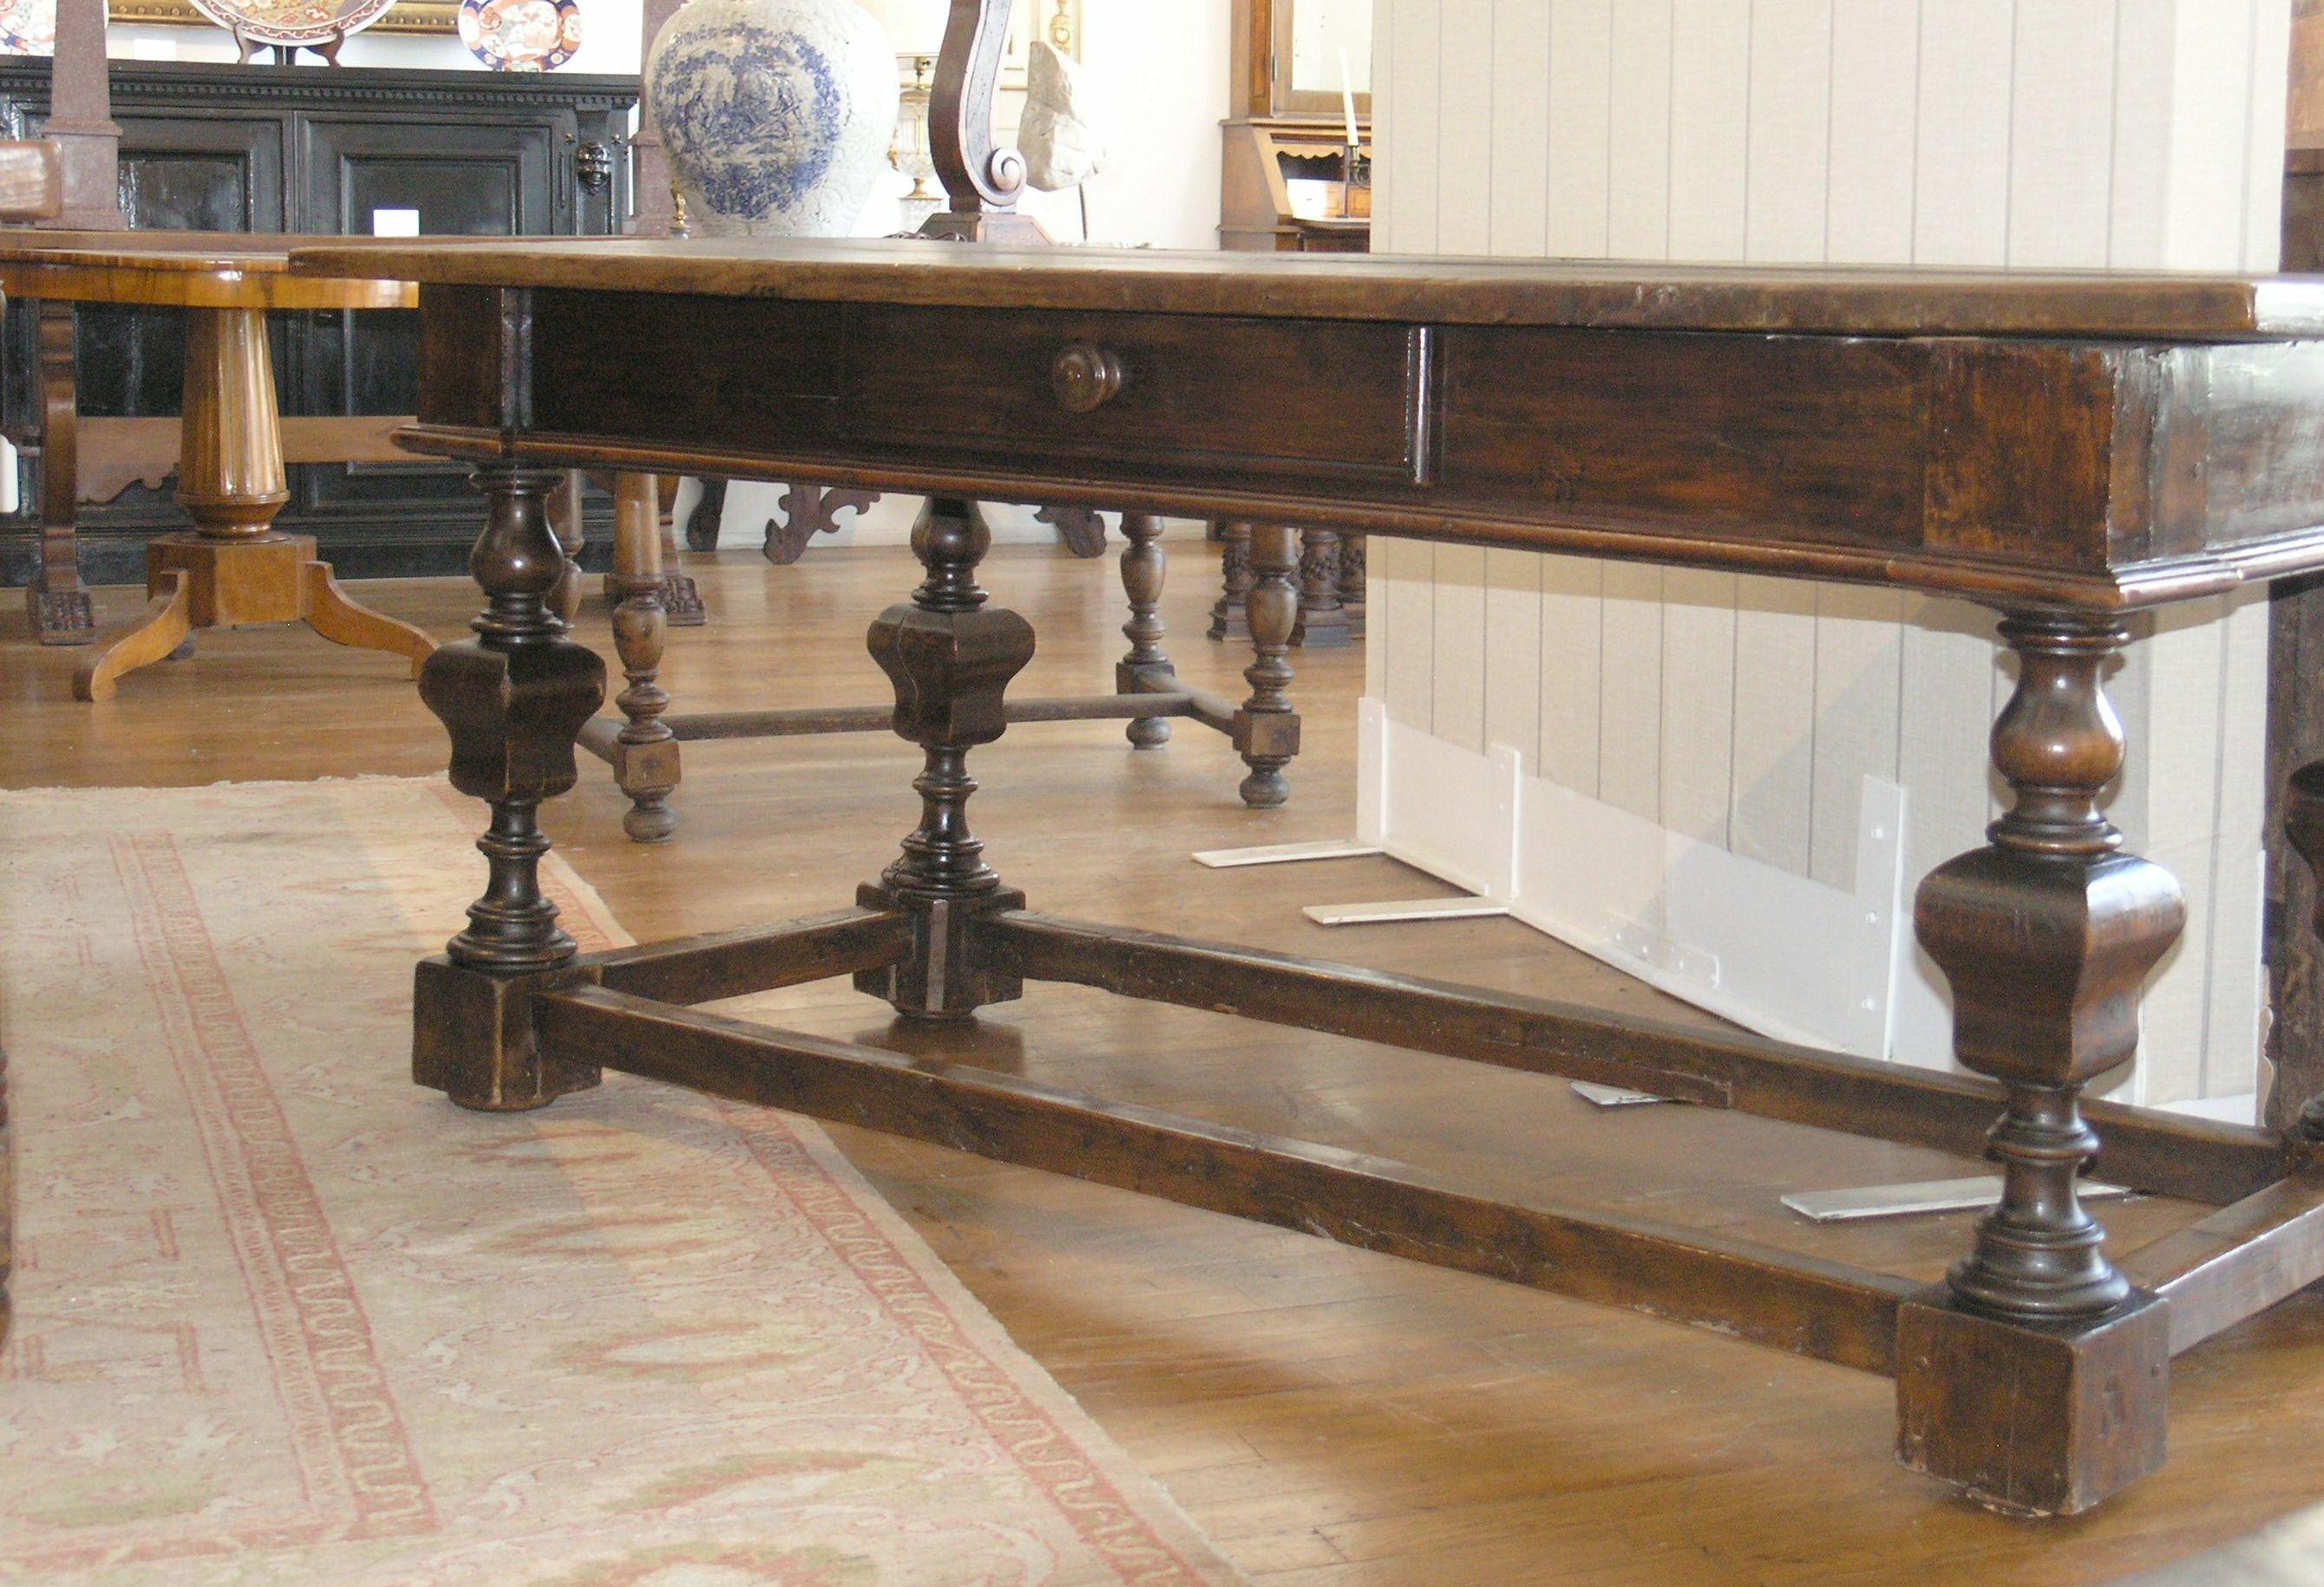 Rectangular top above a long drawer raised baluster legs joined by stretchers.